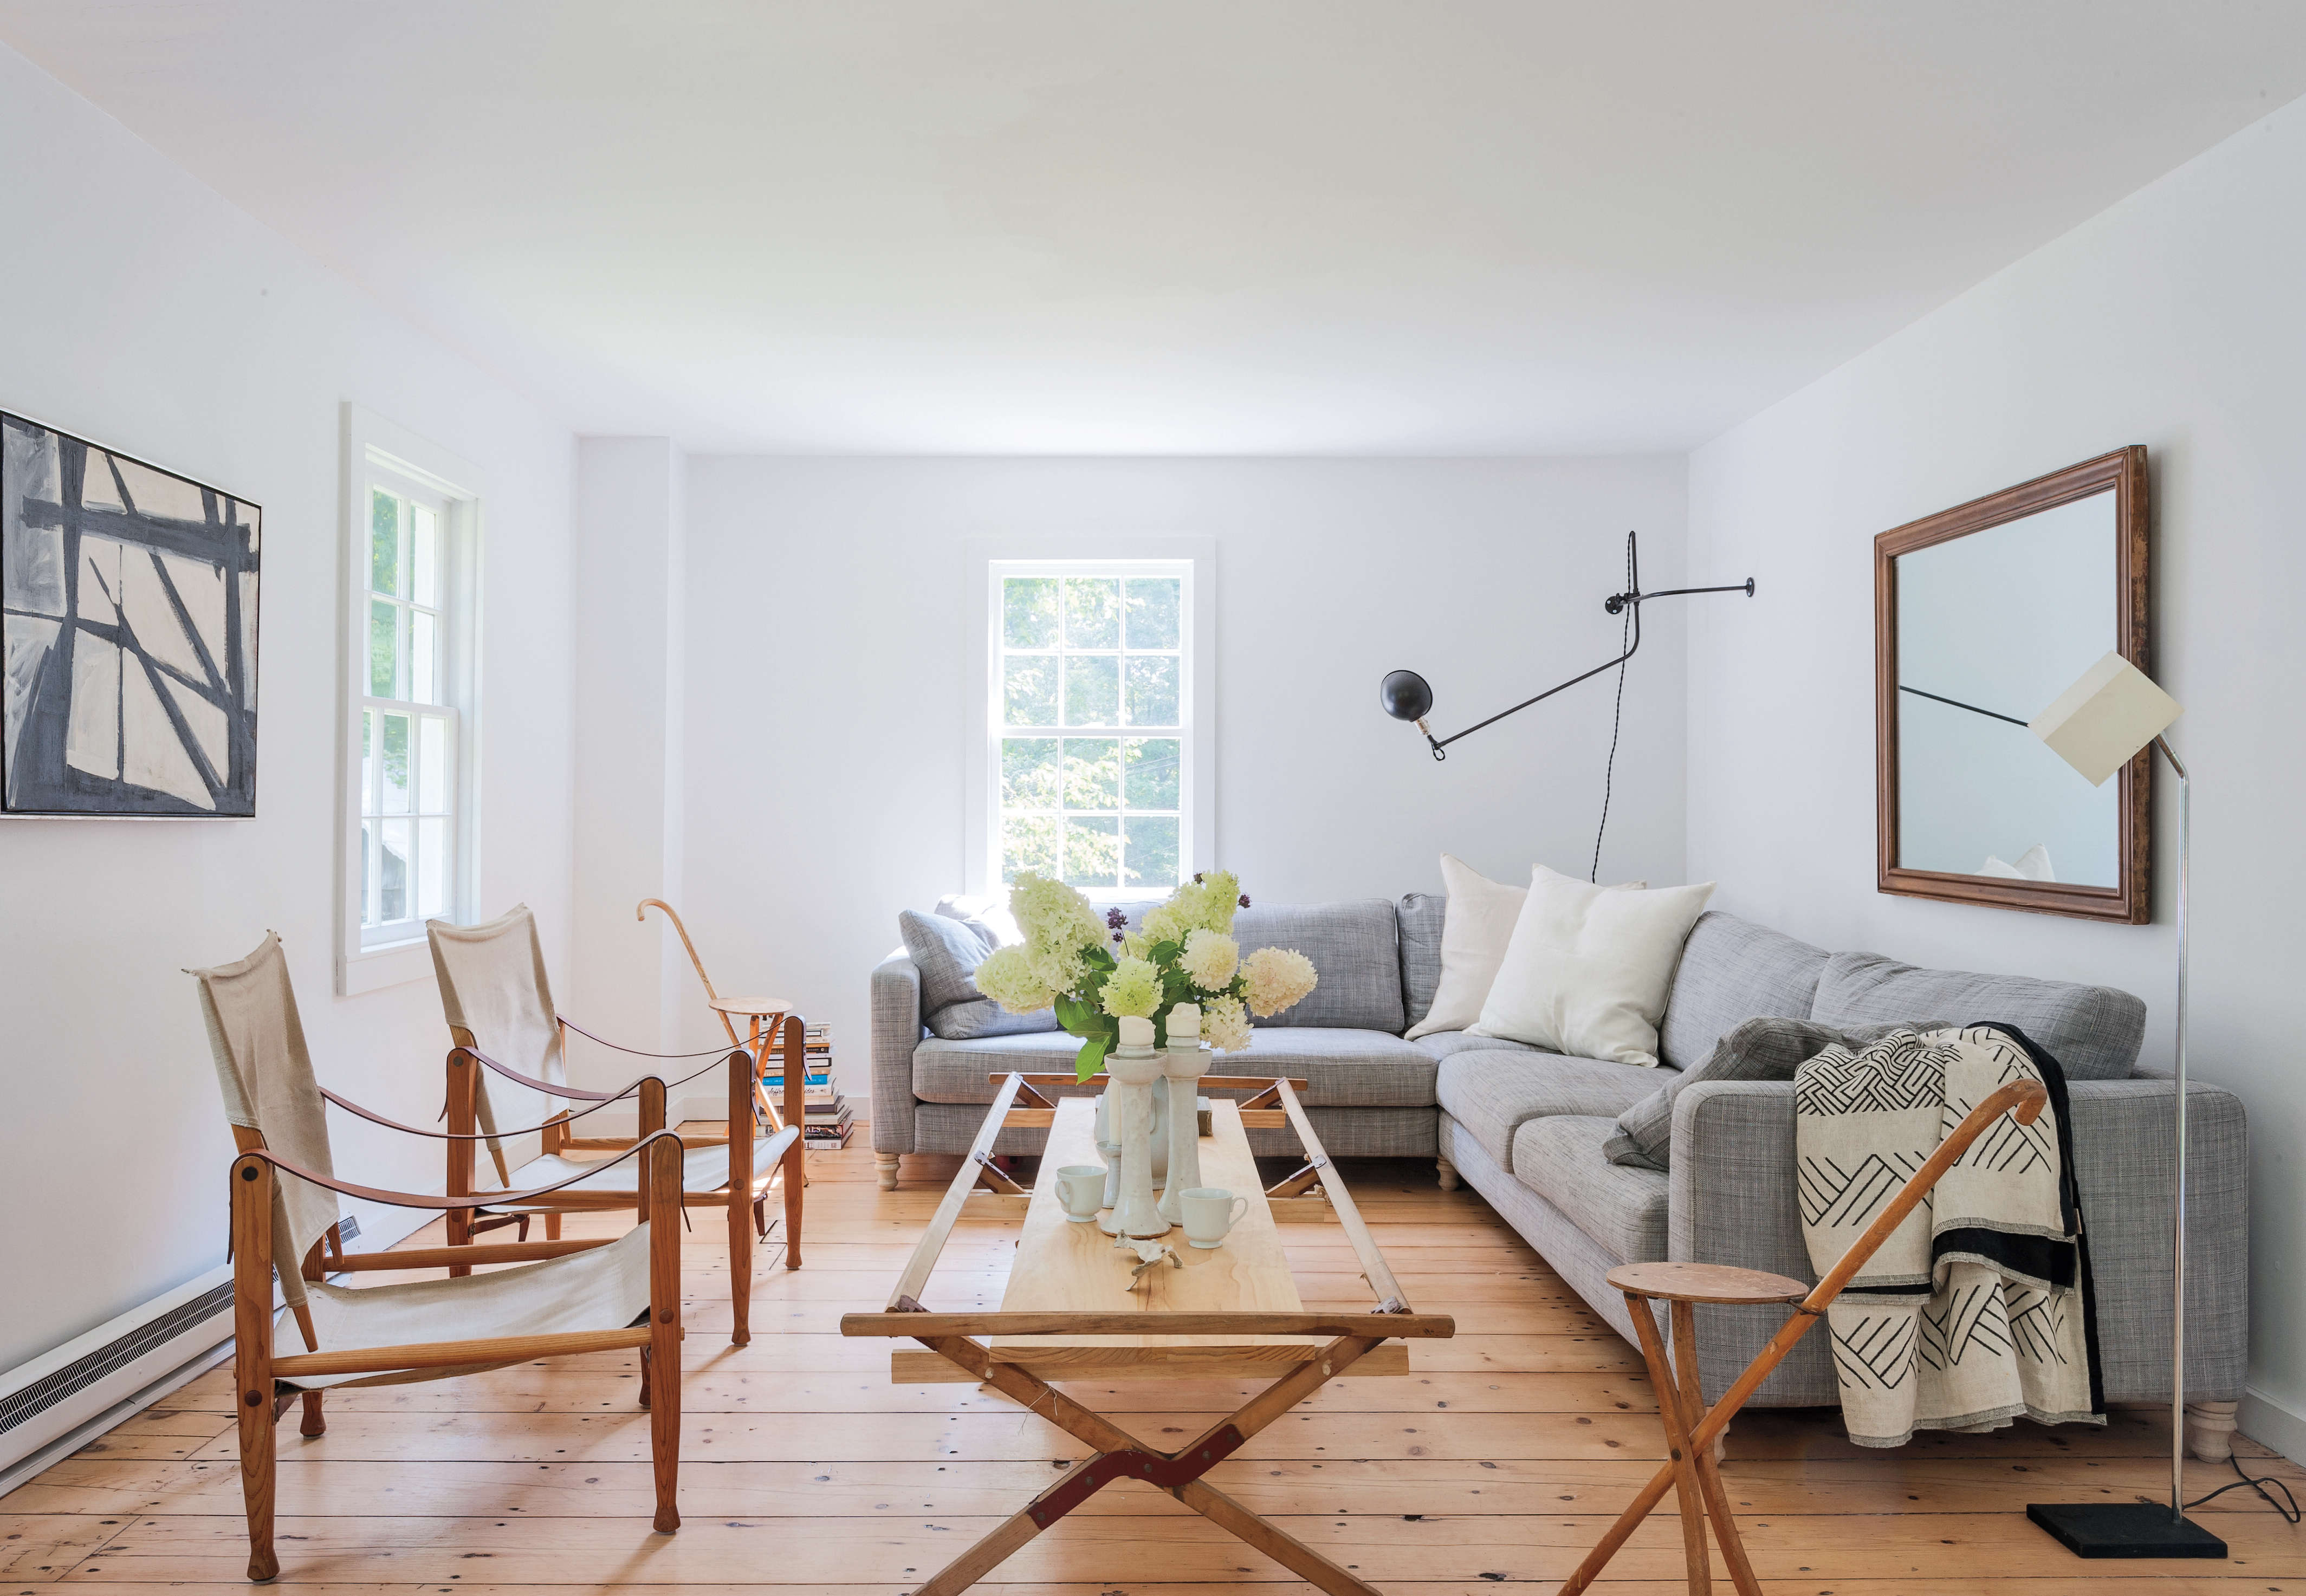 Expert Advice 11 Tips For Making A Room Look Bigger Remodelista